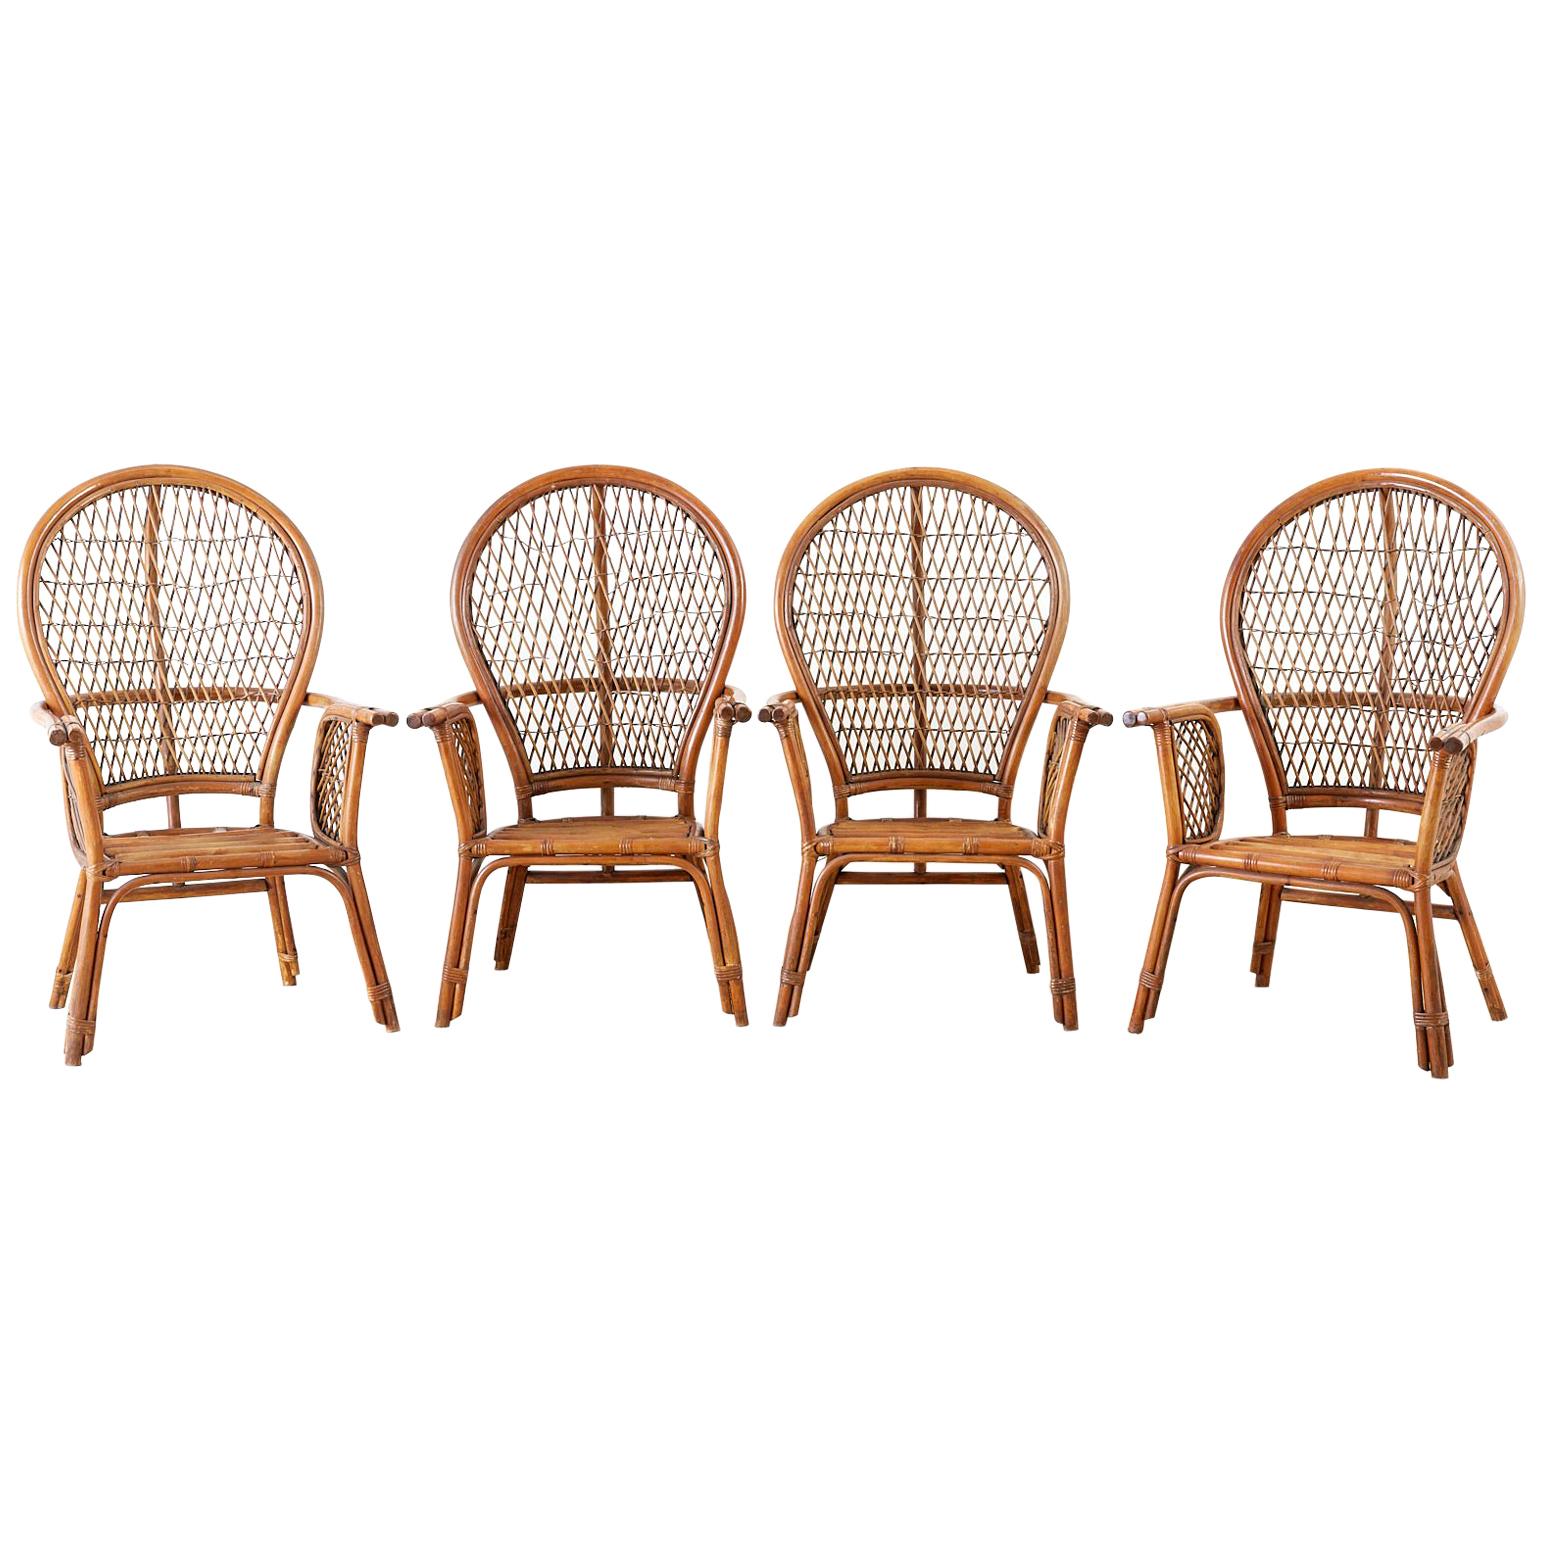 Set of Four Ficks Reed Rattan Peacock Lounge Chairs